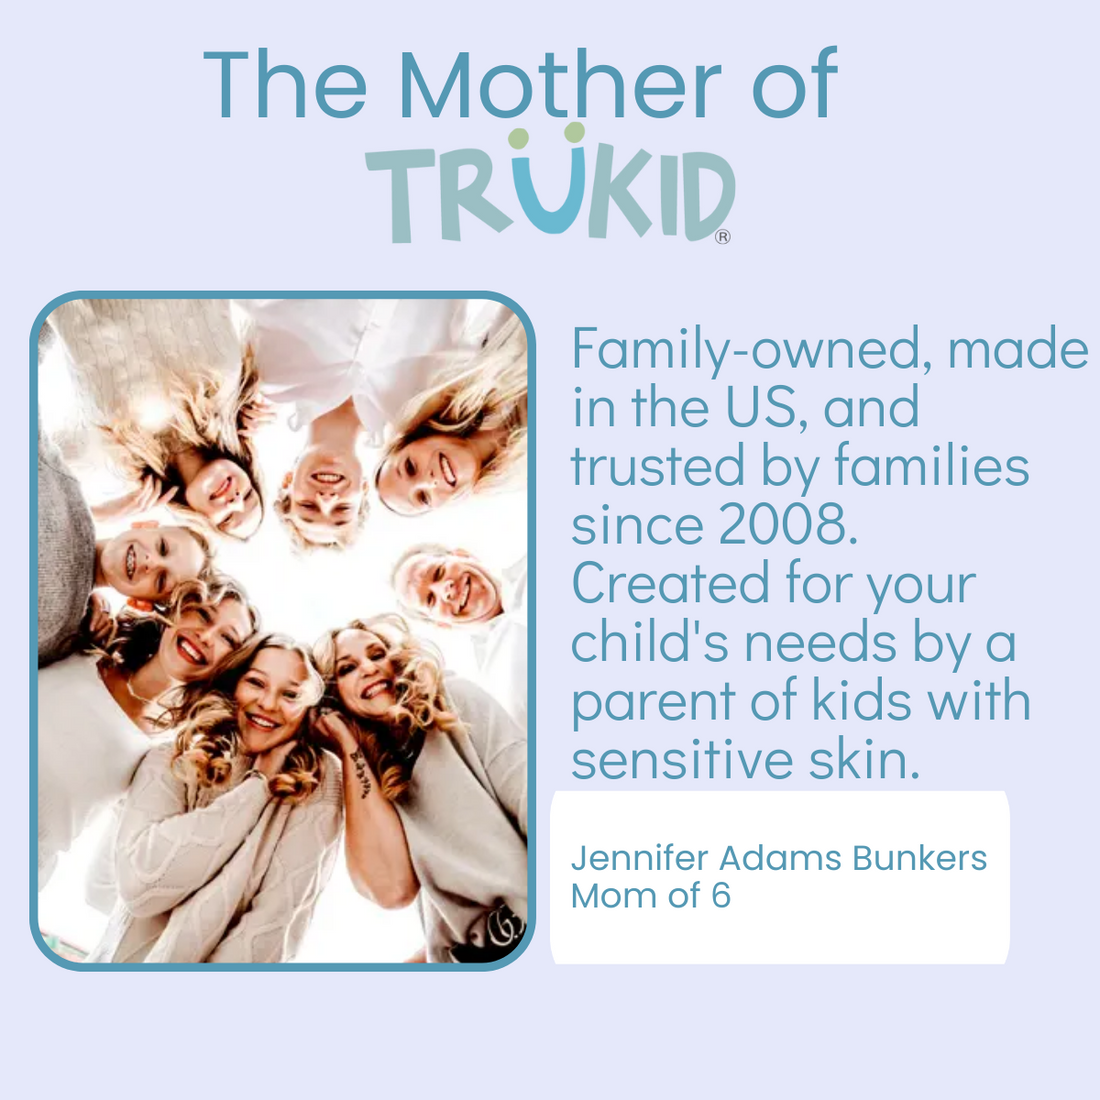 TruKid is family-owned and made in the USA.